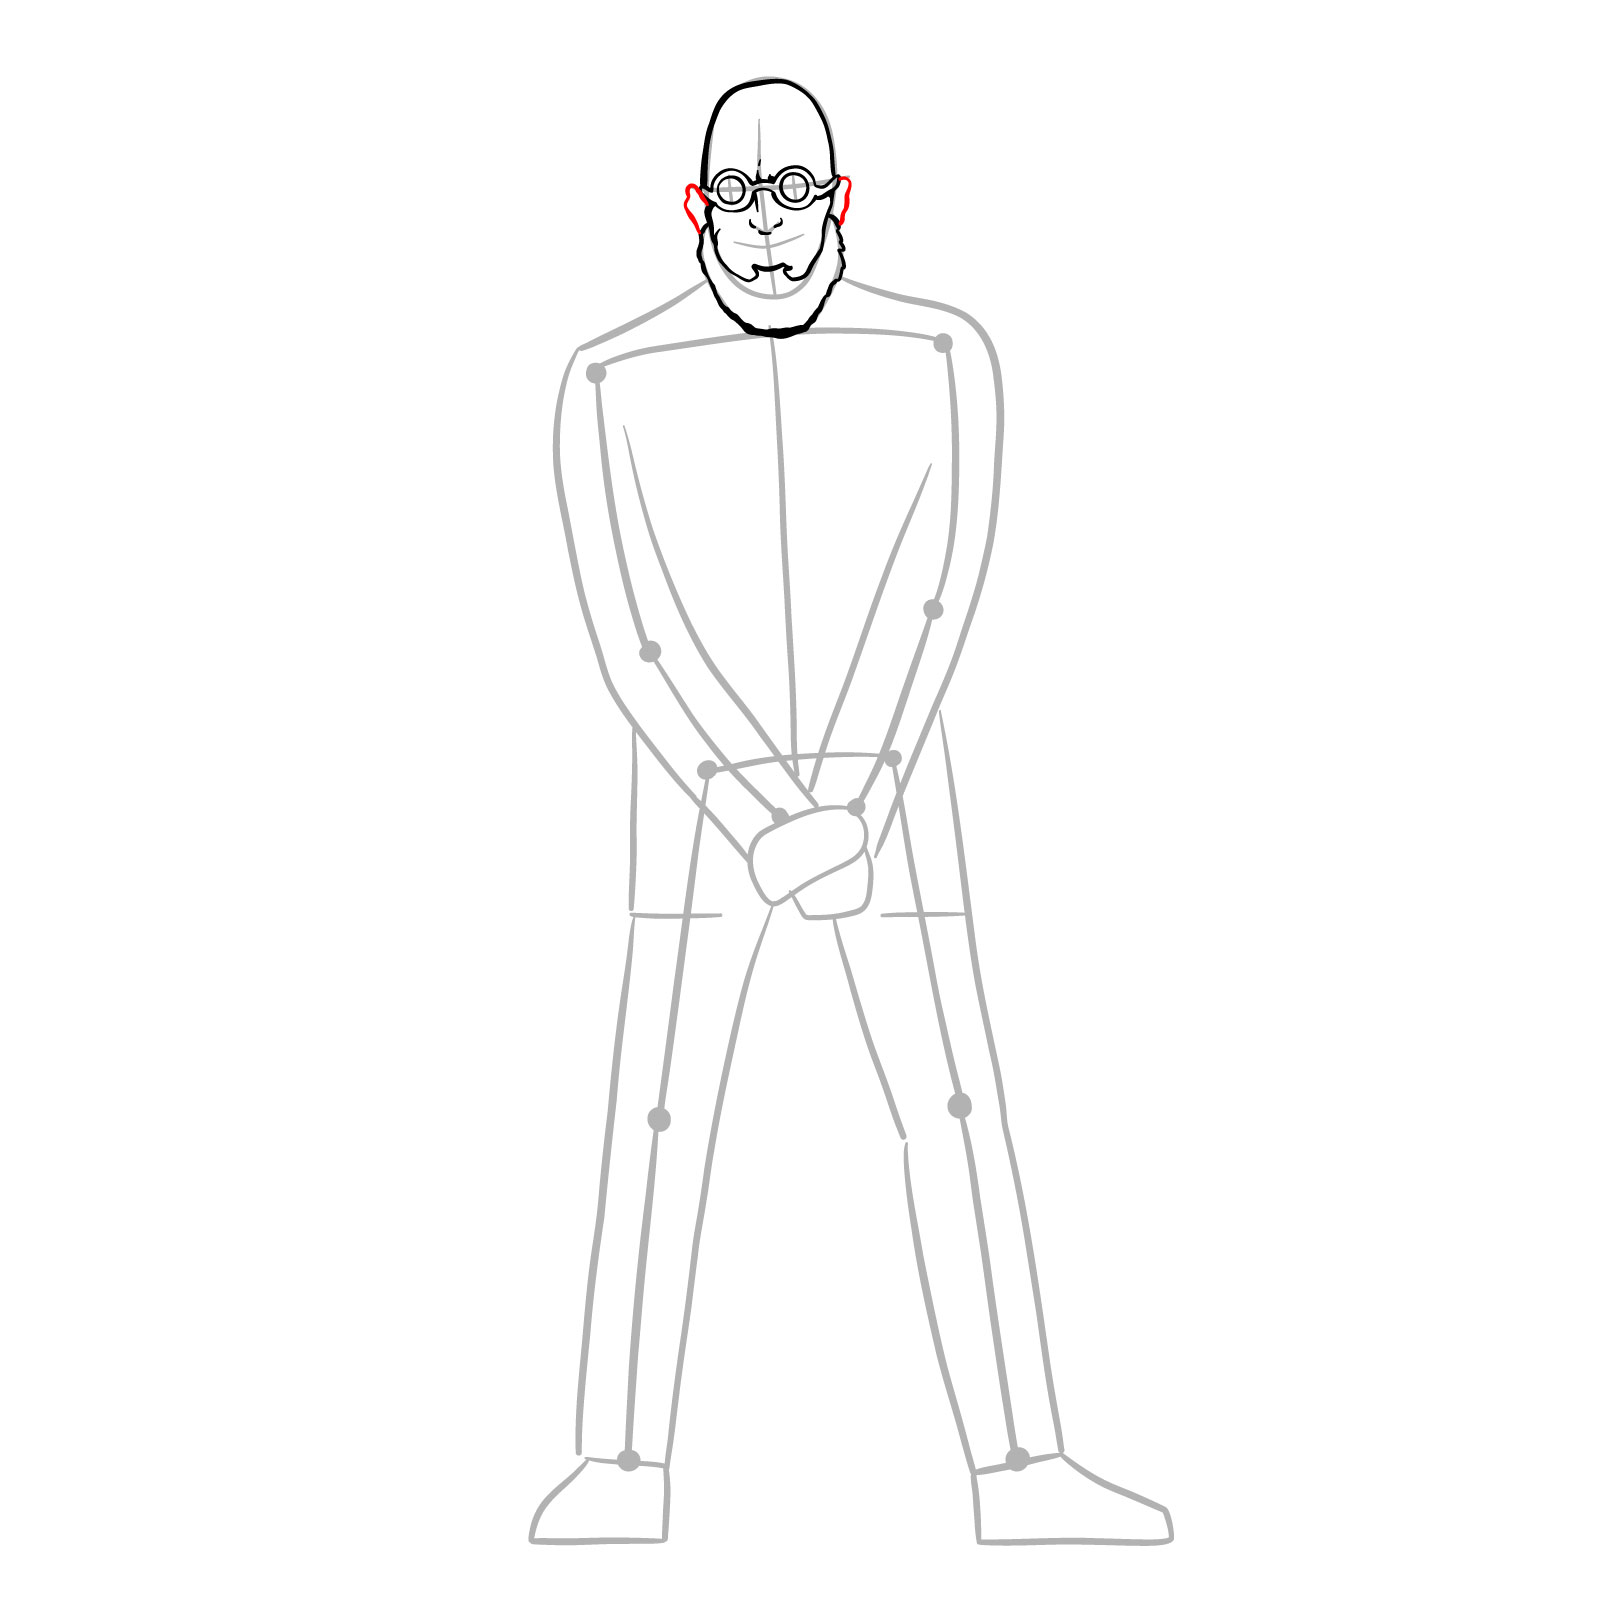 How to draw Dr. Hugo Strange from DC Comics - step 10